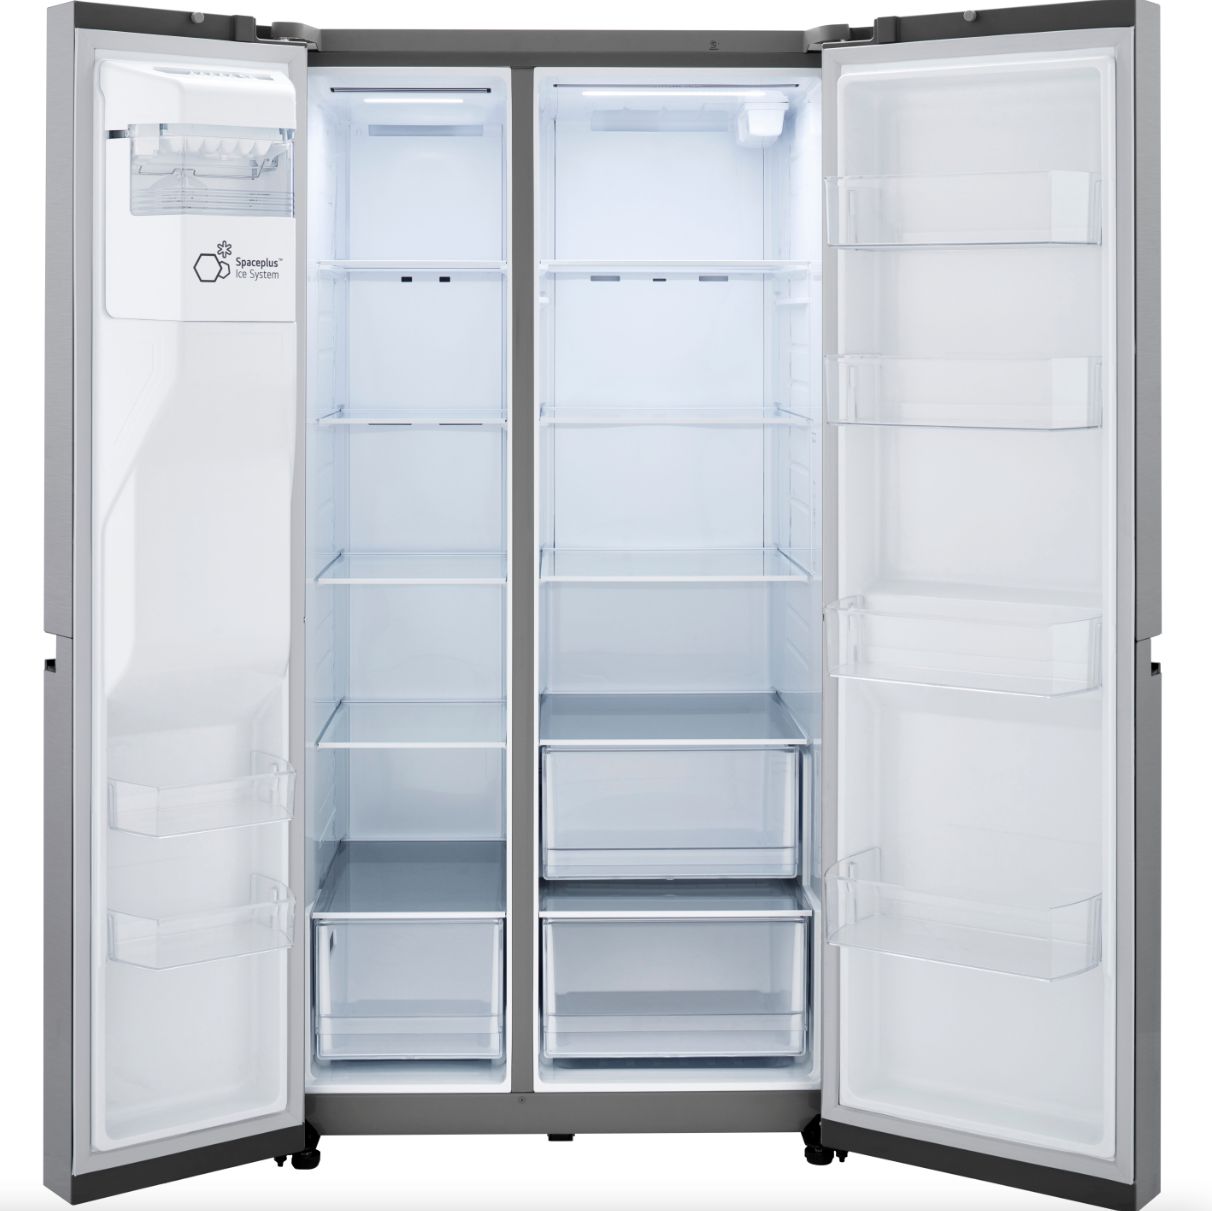 LG 36 Inch Side-by-Side Counter-Depth Refrigerator in Stainless Steel Look 23 Cu. Ft. (LRSXC2306V)